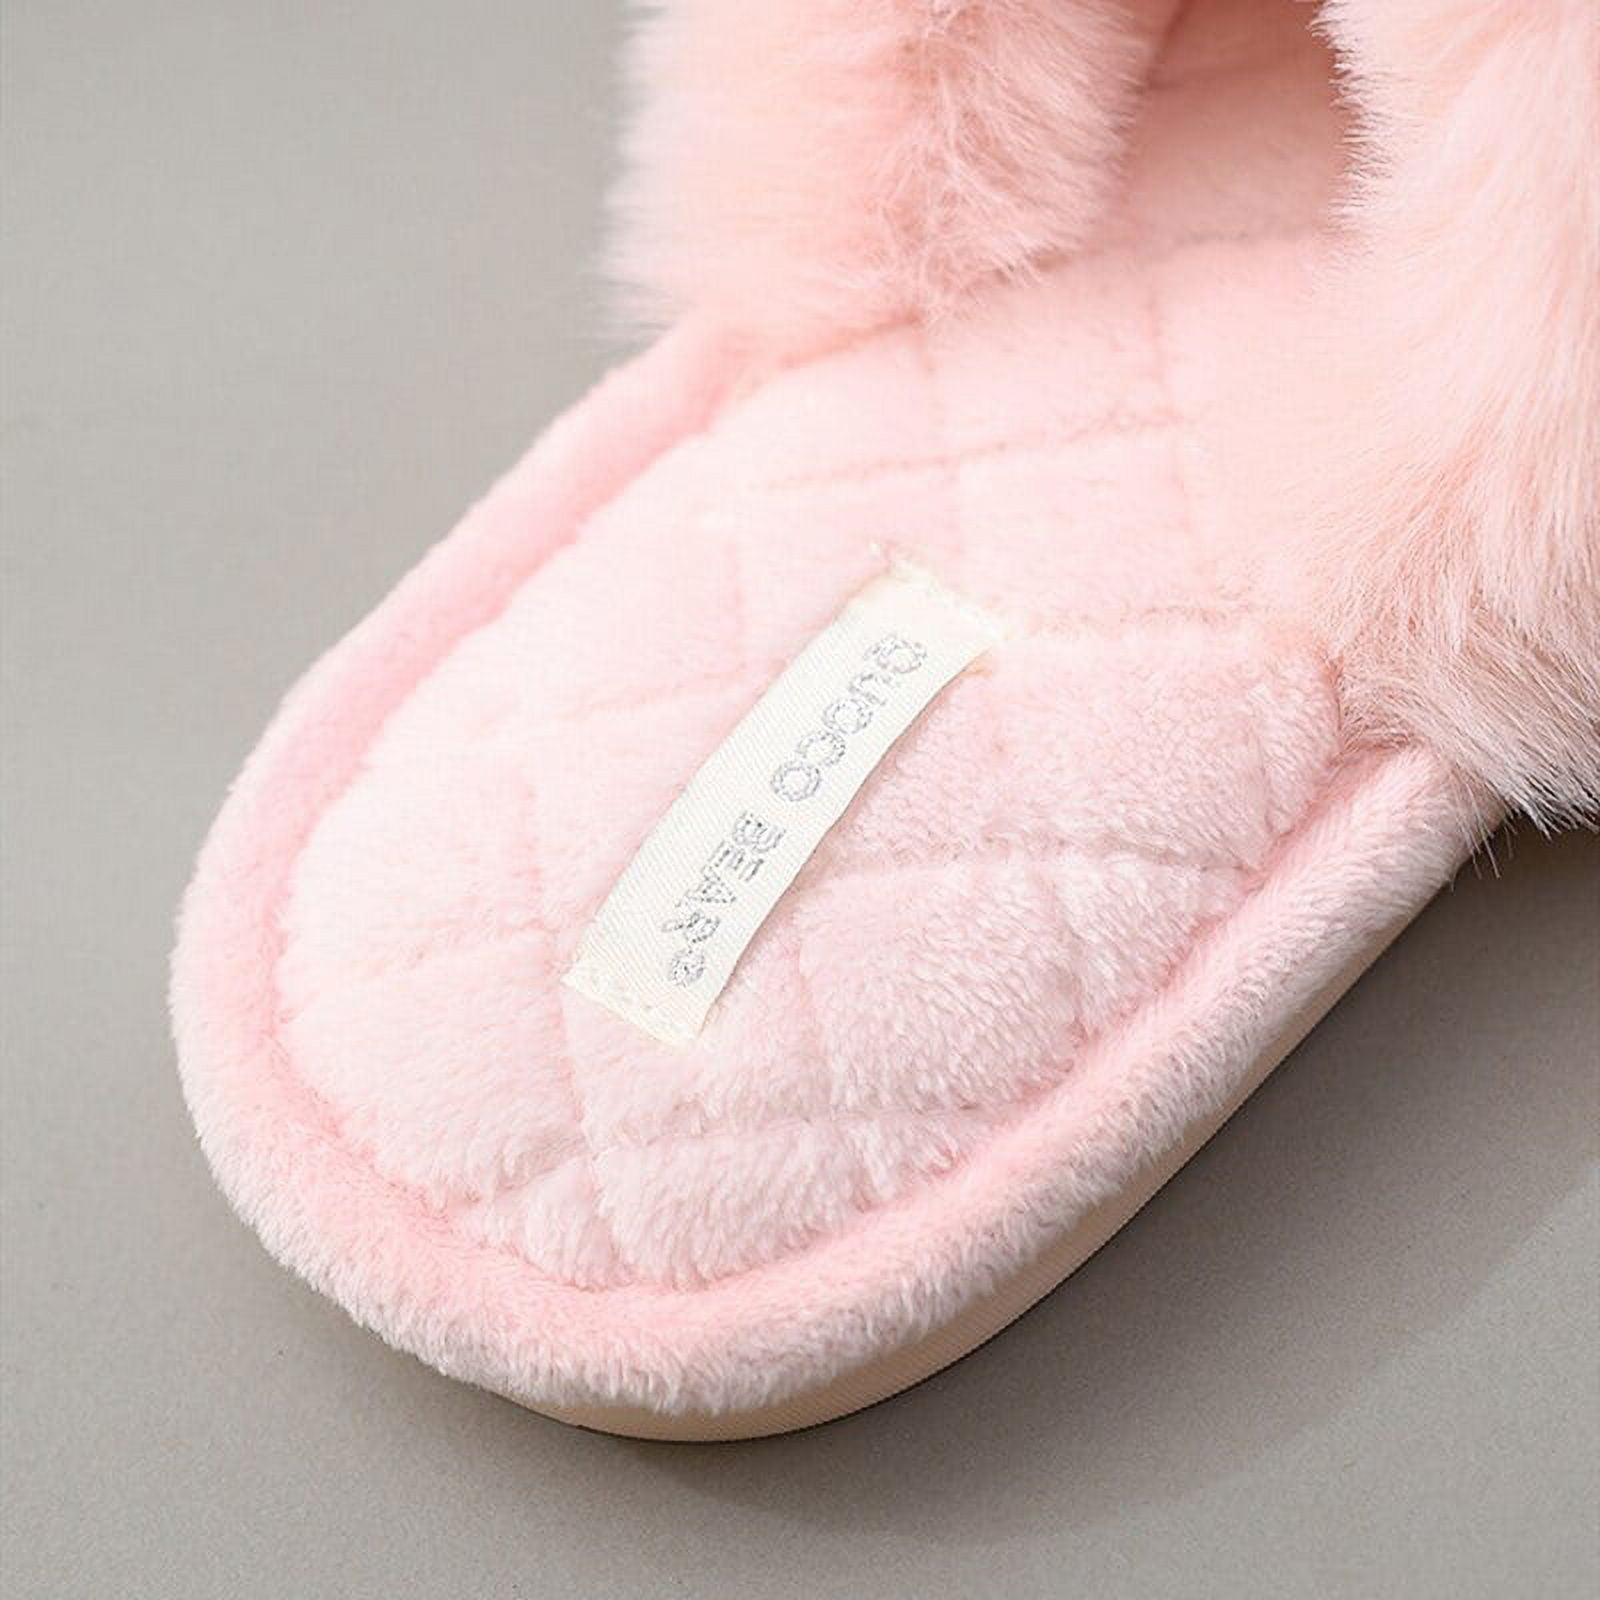  NINE WEST Faux Fur Fuzzy Cross Band Premium Slippers For  Women, Open-Toe House Slides, Blush, Small